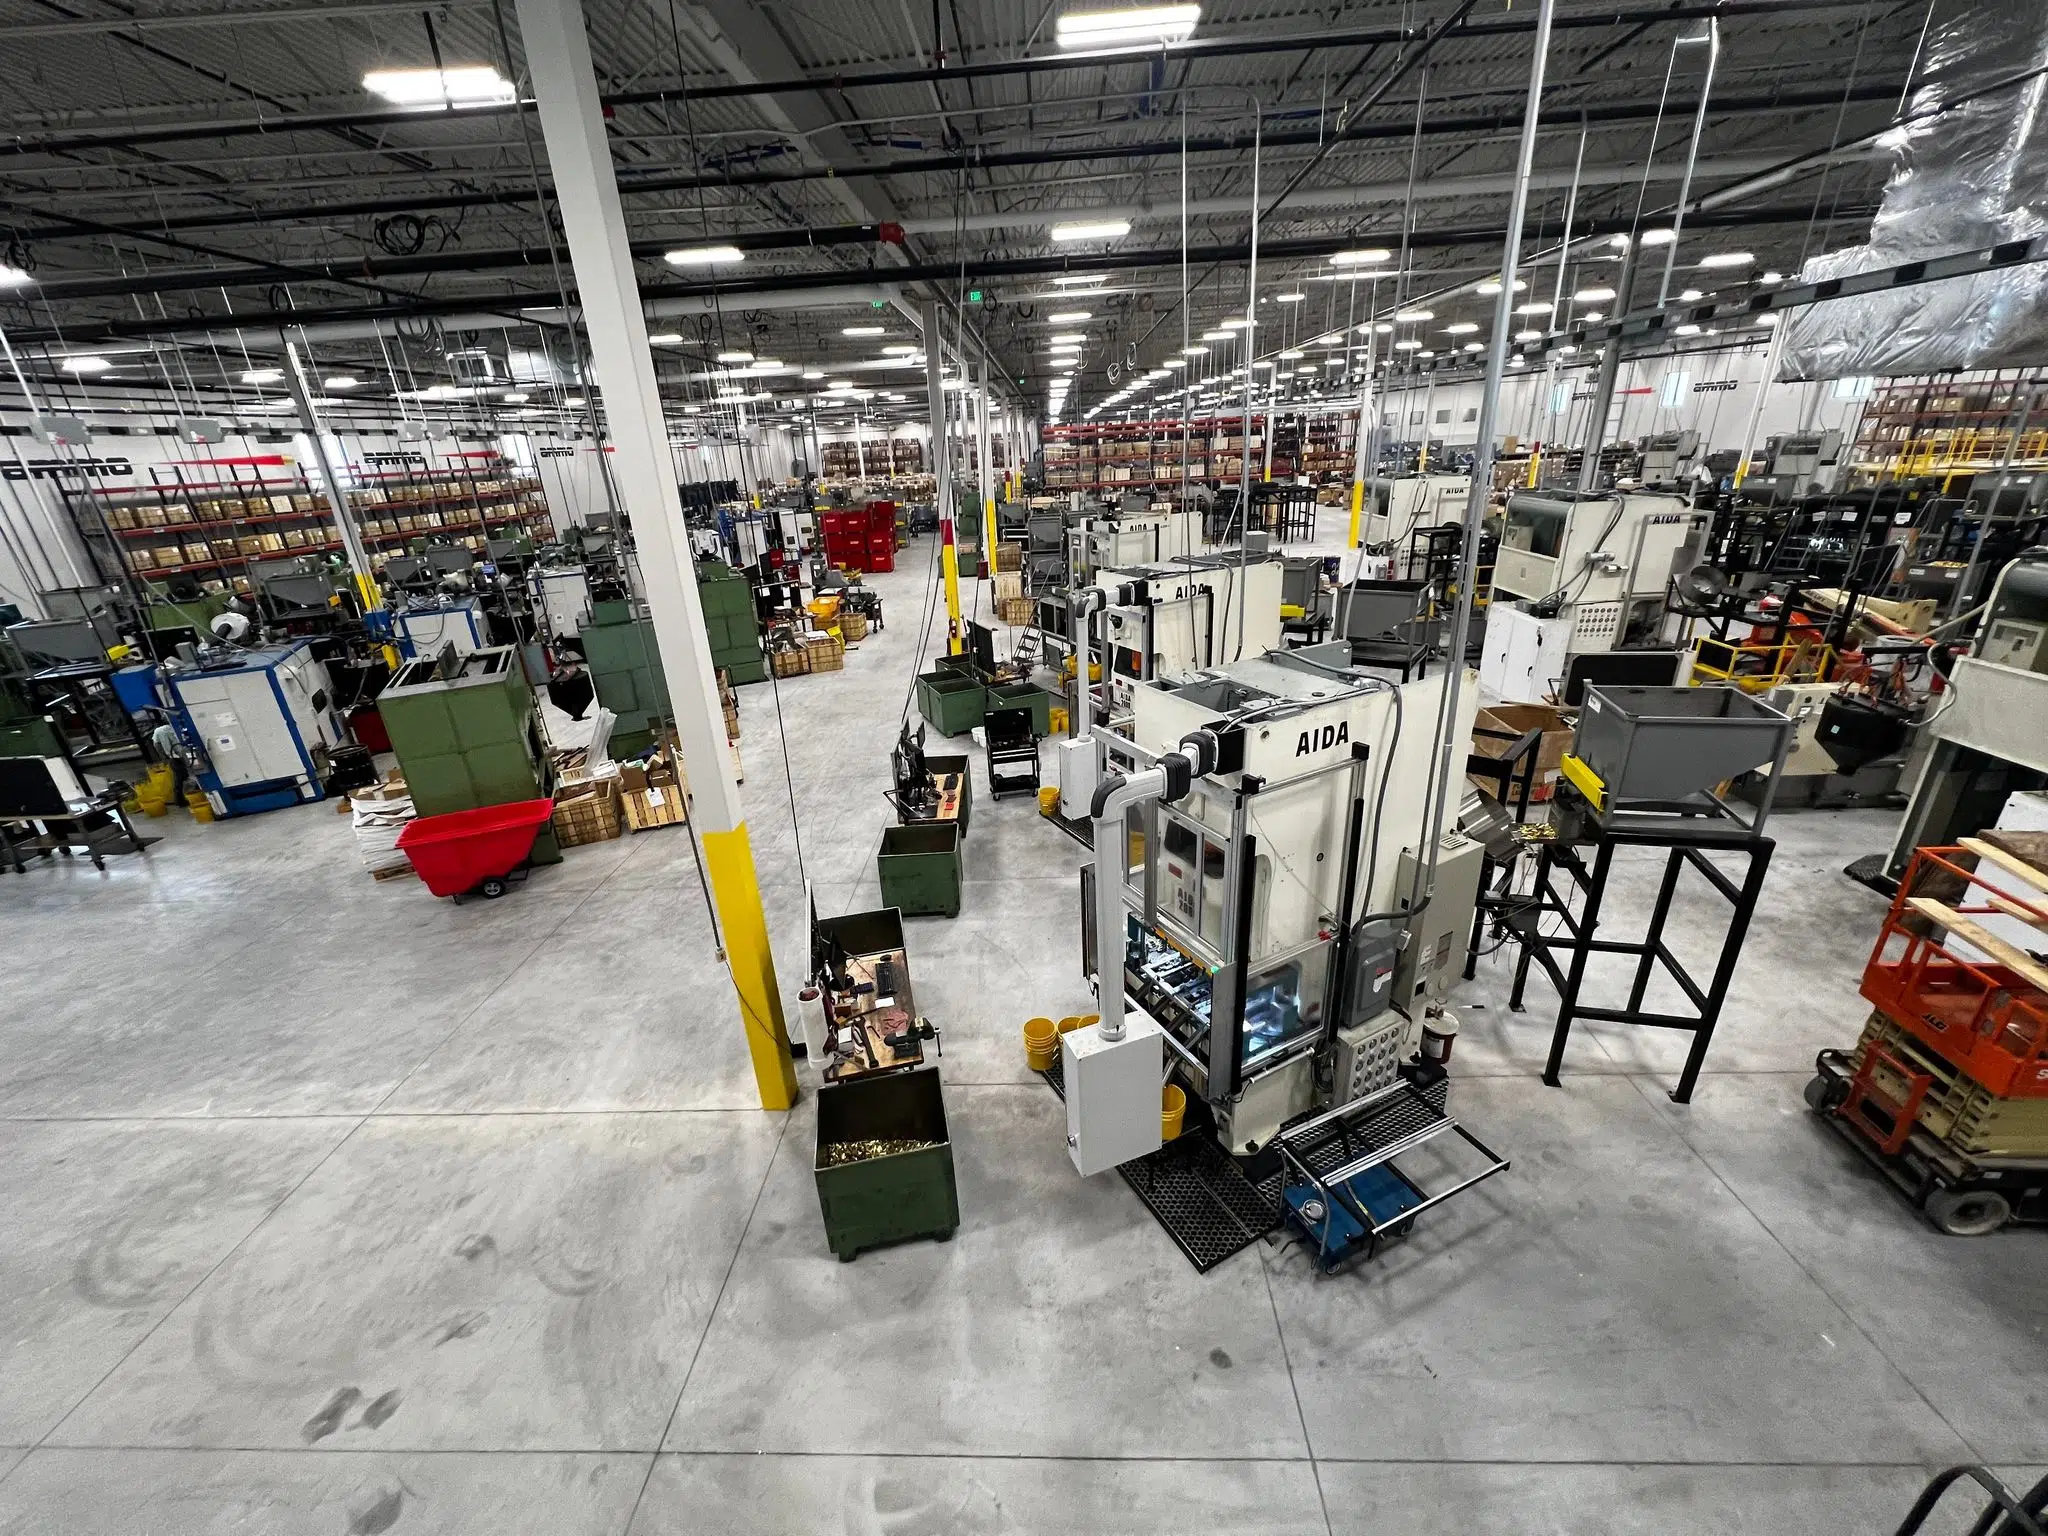 Wisconsin's 6th Congressional District Leads Country with Manufacturing Job Opportunities